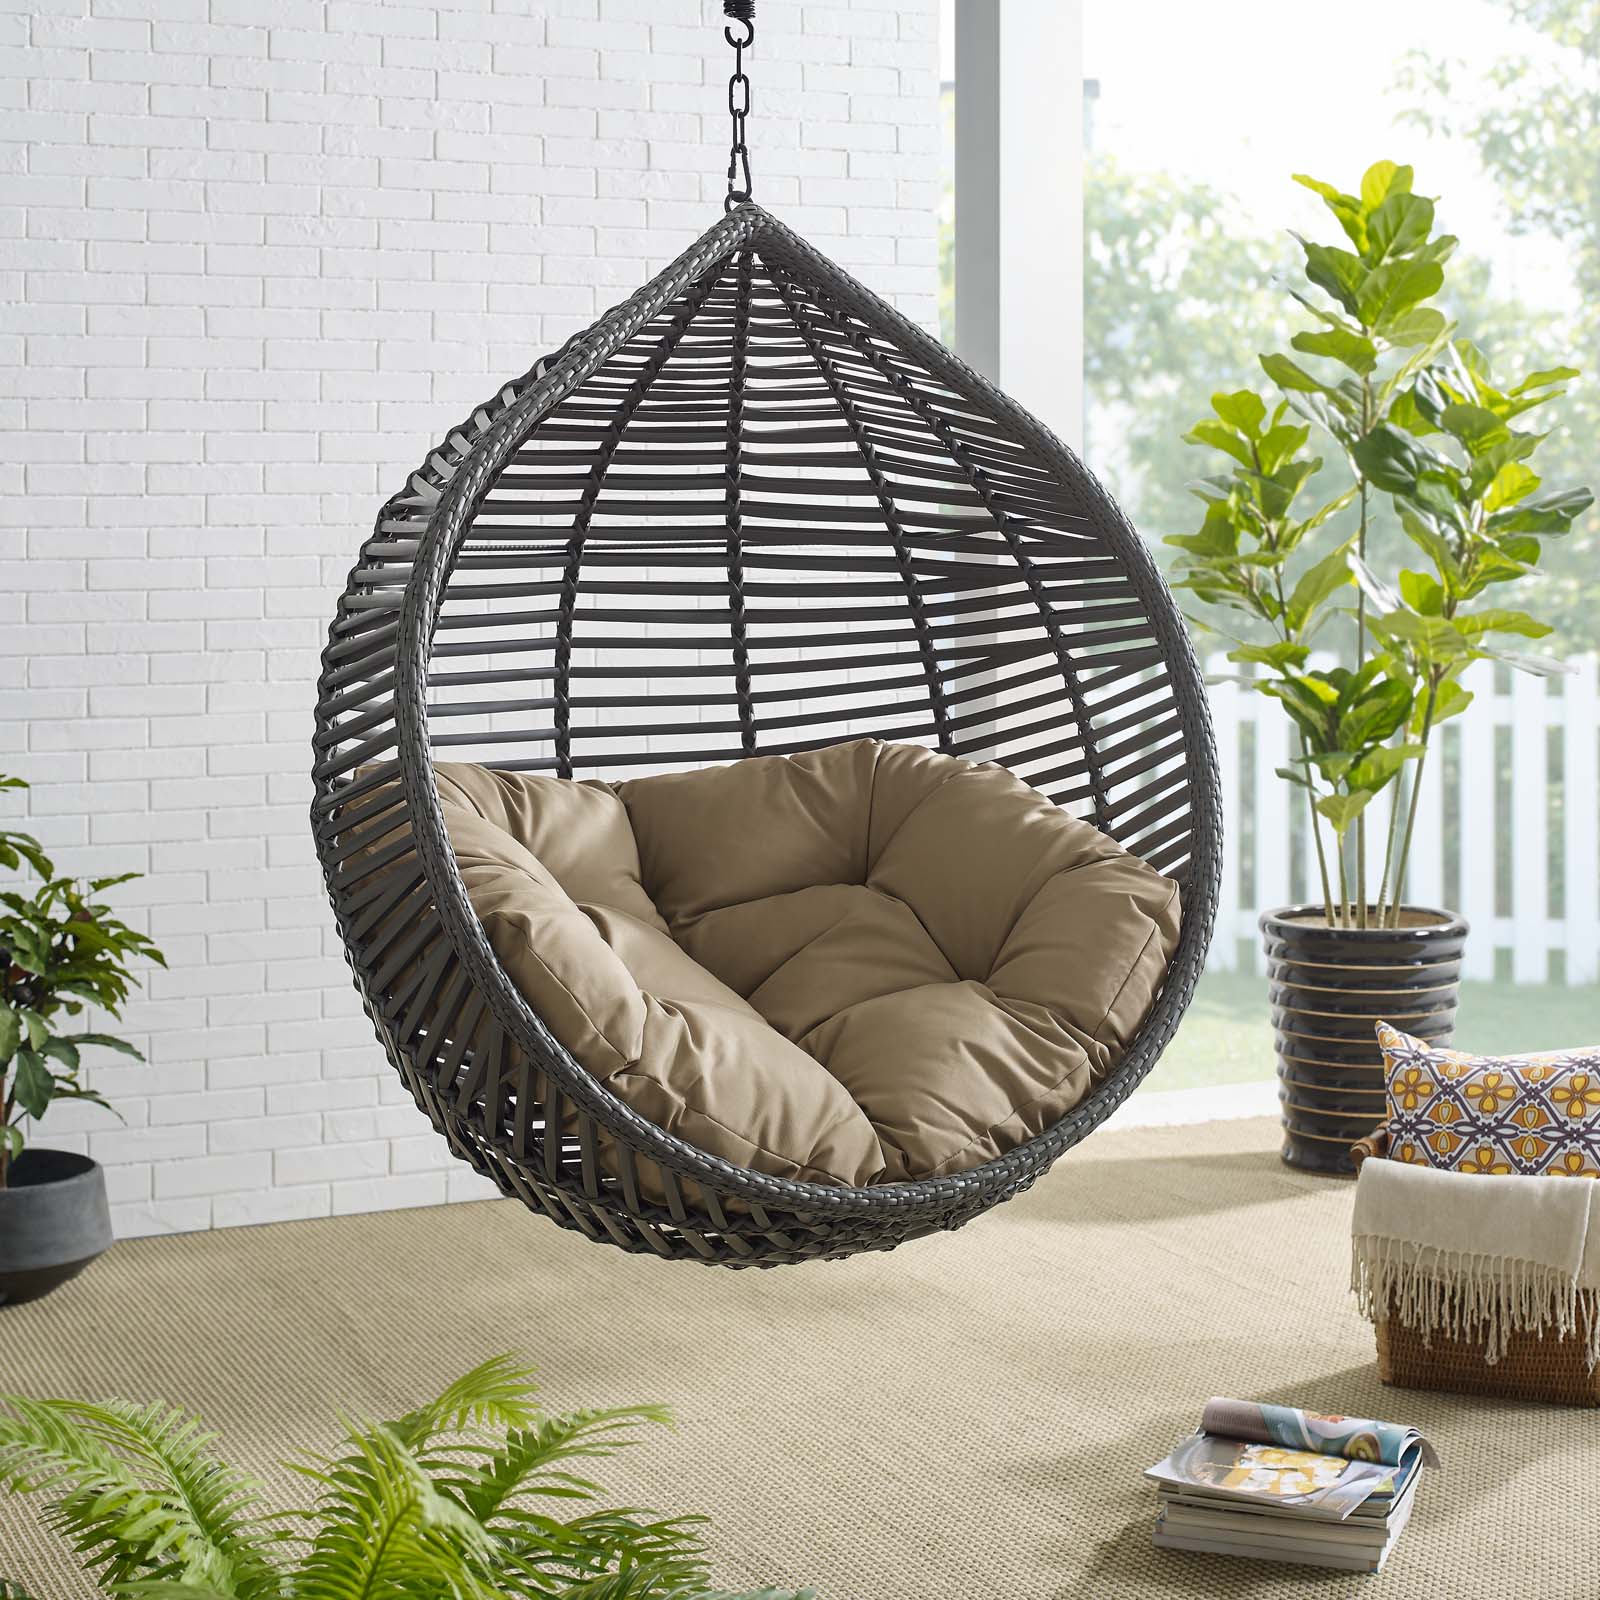 Garner Teardrop Outdoor Patio Swing Chair Without Stand Gray Mocha